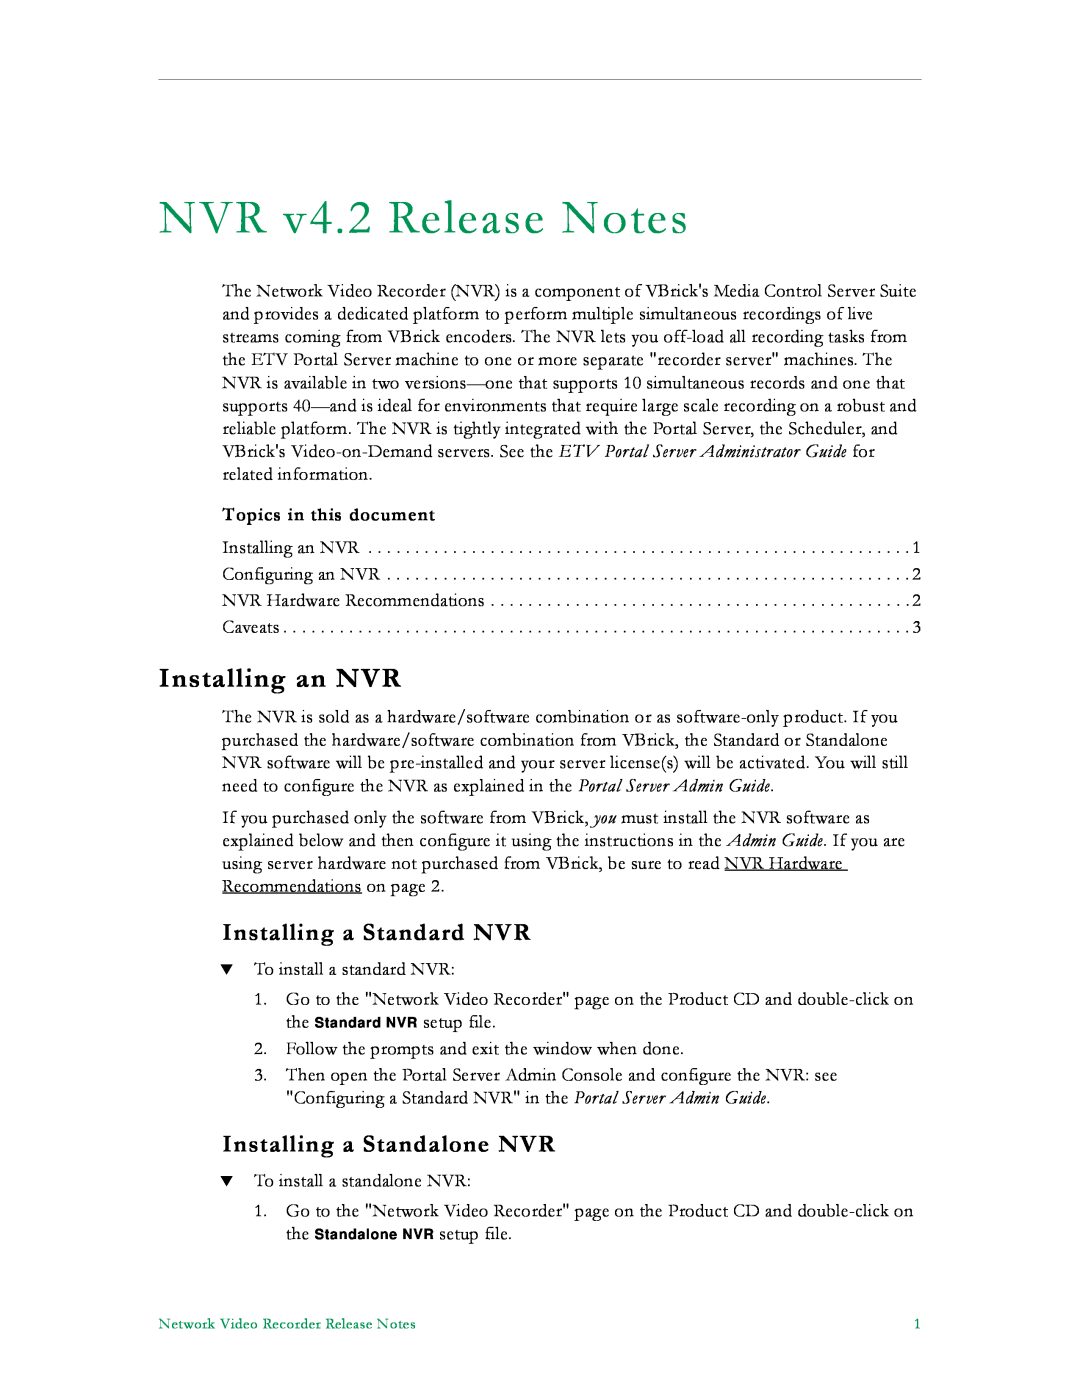 VBrick Systems EtherneTV NVR Installing an NVR, Topics in this document, NVR v4.2 Release Notes, Installing a Standard NVR 